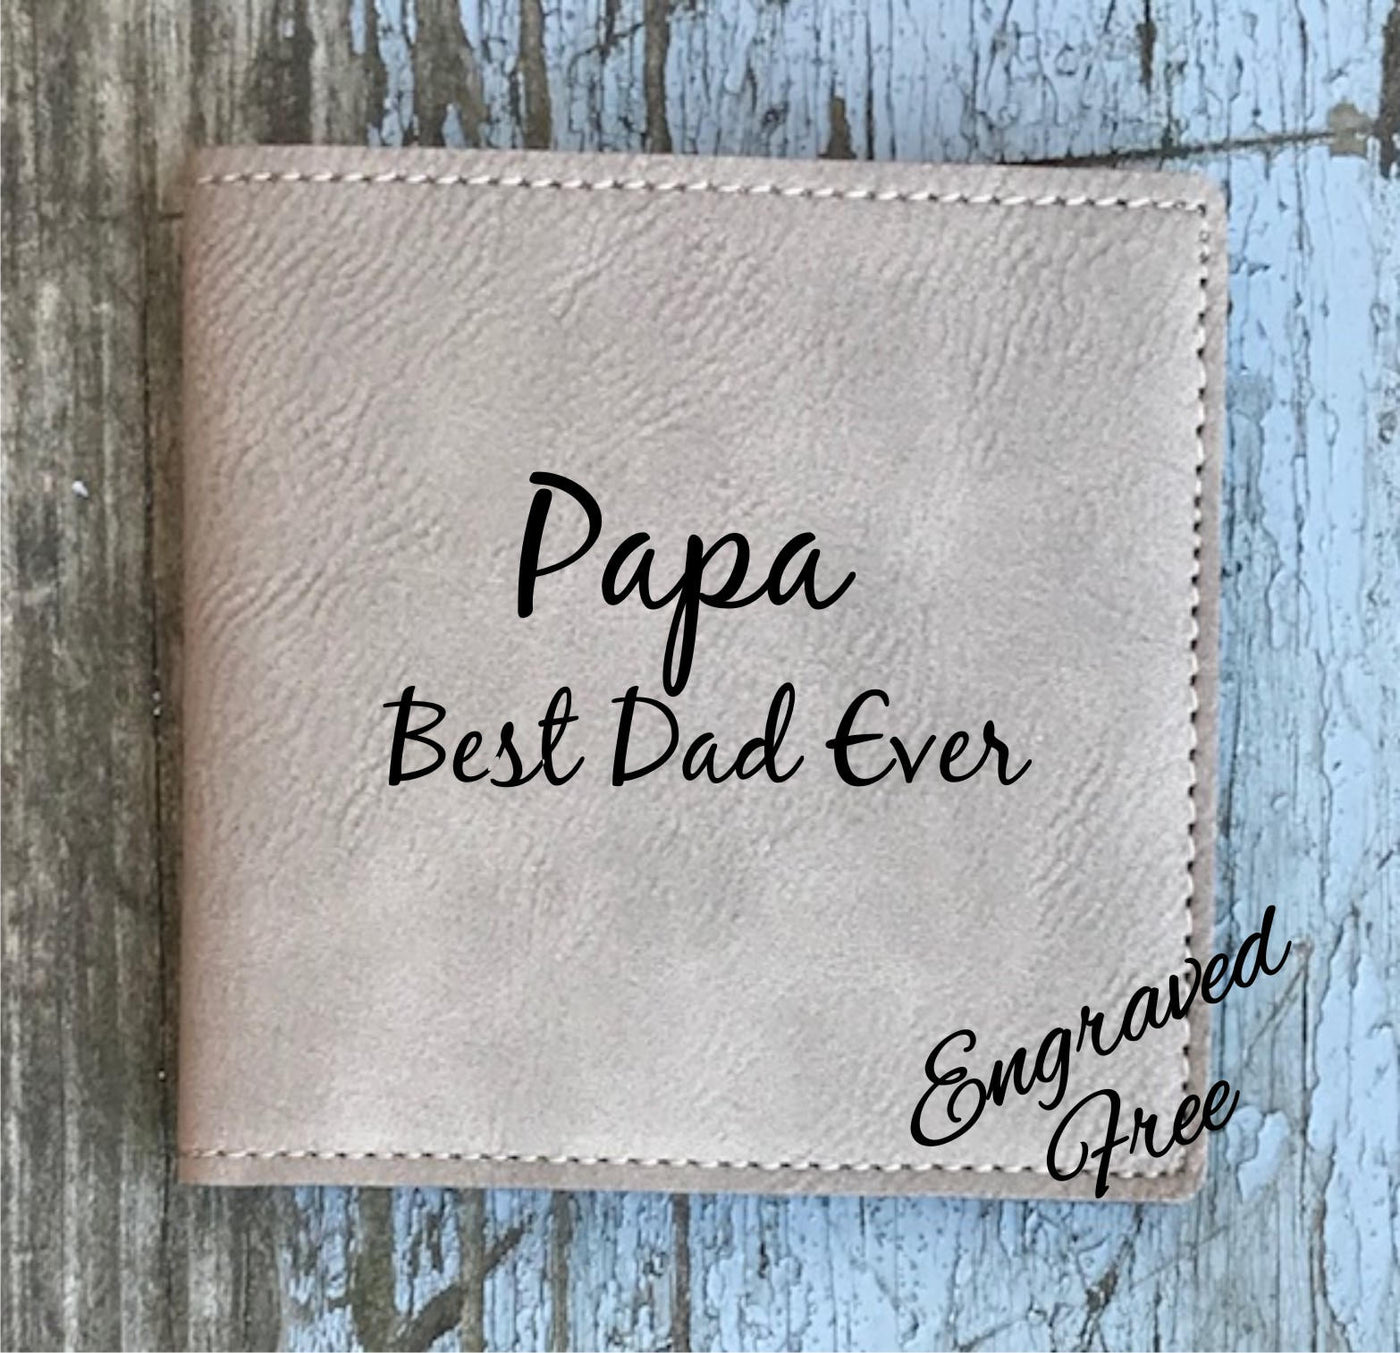 Personalized Mens Wallet, Brown Bi-fold Wallet, Monogrammed Wallet, Fathers Day Gift, Monogrammed Dad Gift, Groomsman Gift